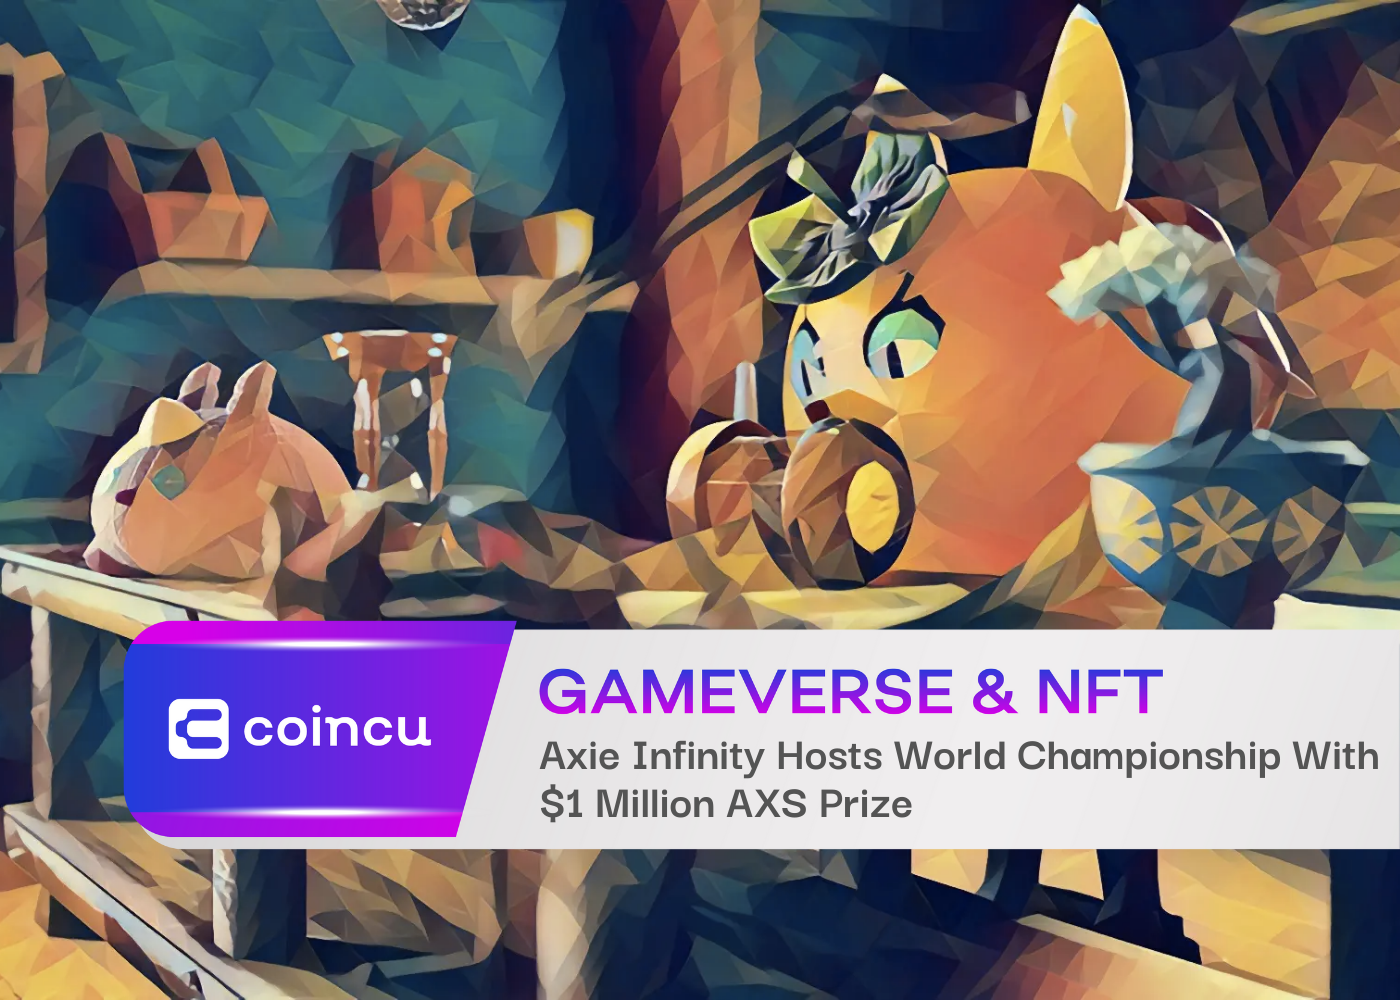 Axie Infinity Hosts World Championship With $1 Million AXS Prize